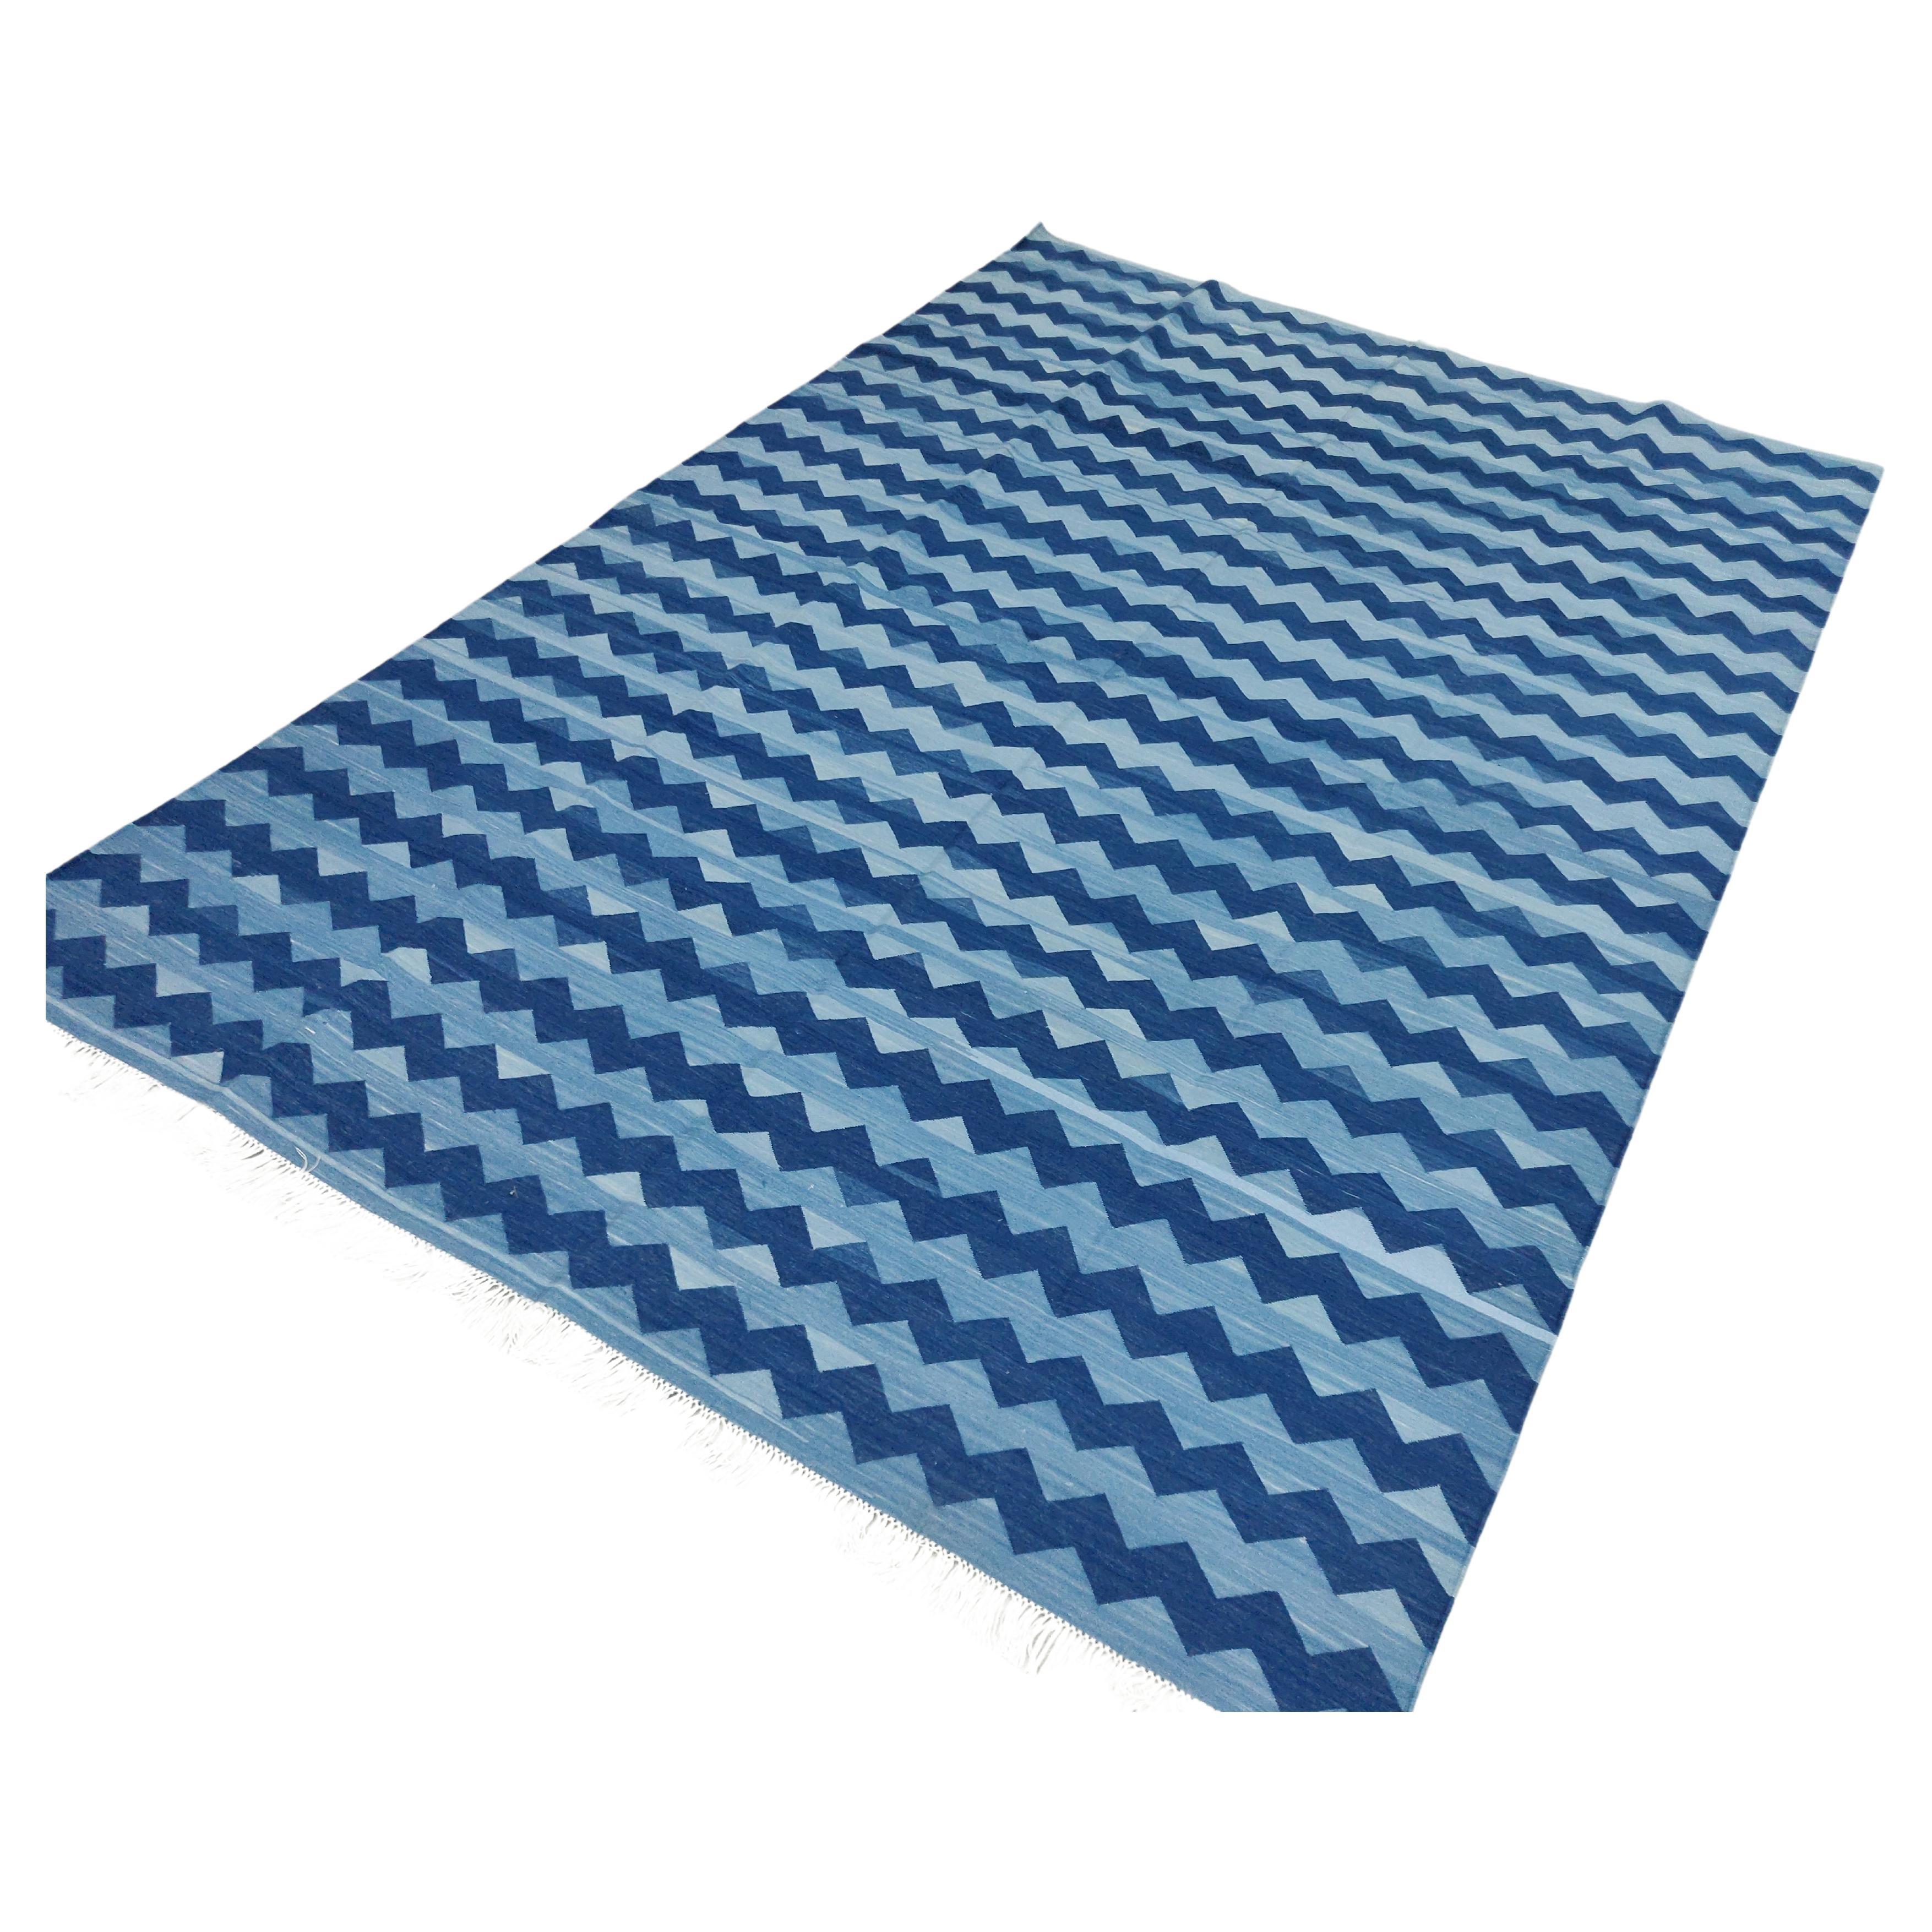 Handmade Cotton Area Flat Weave Rug, 6x9 Blue Zig Zag Striped Indian Dhurrie Rug For Sale